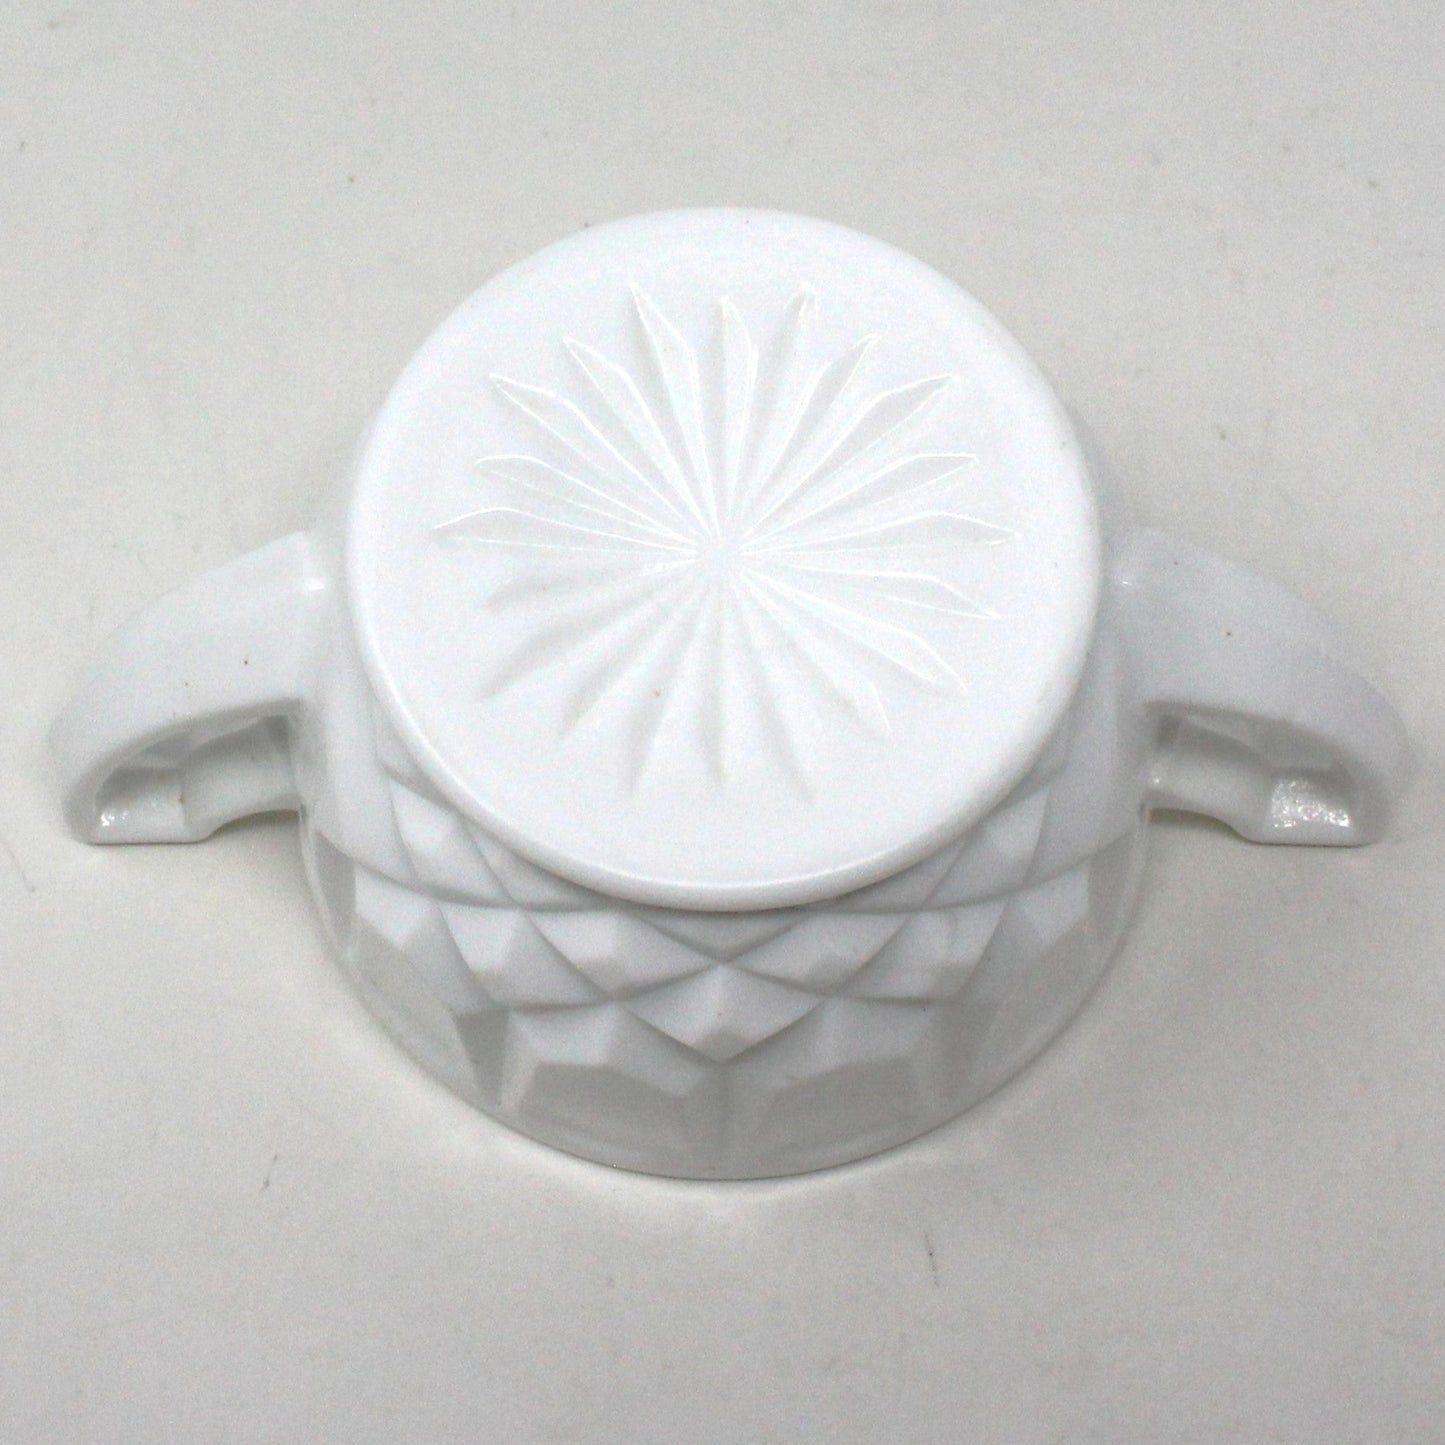 Sugar Bowl with Lid, Tiffin-Franciscan Milk Glass, Betsy Ross Pattern, Vintage